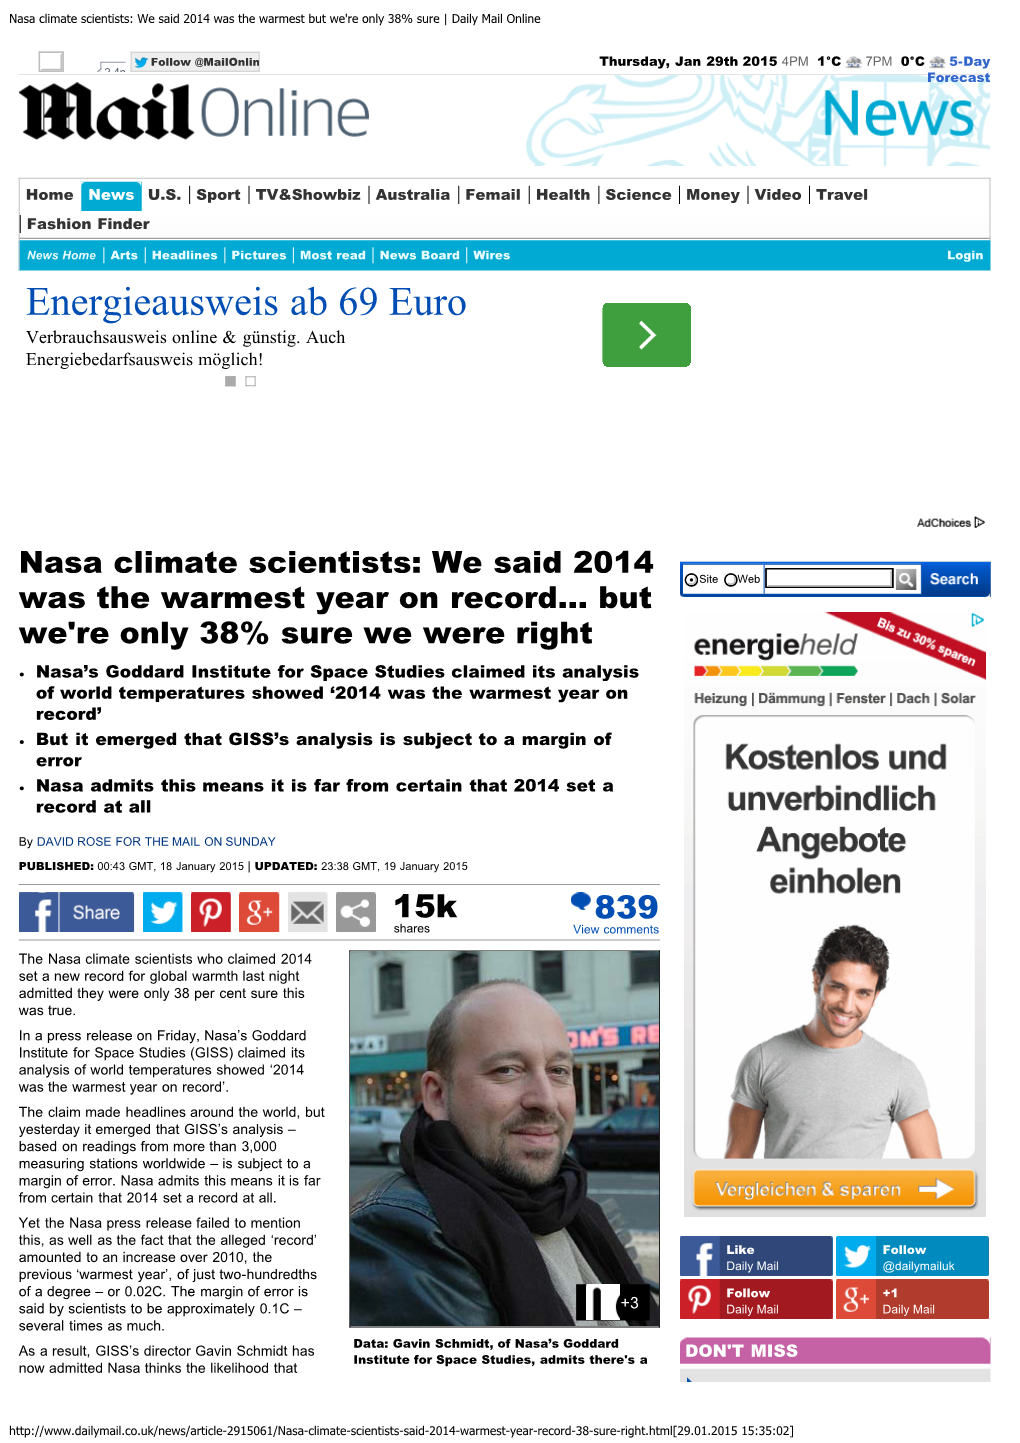 Nasa Climate Scientists: We Said 2014 Was the Warmest but We're Only 38% Sure | Daily Mail Online